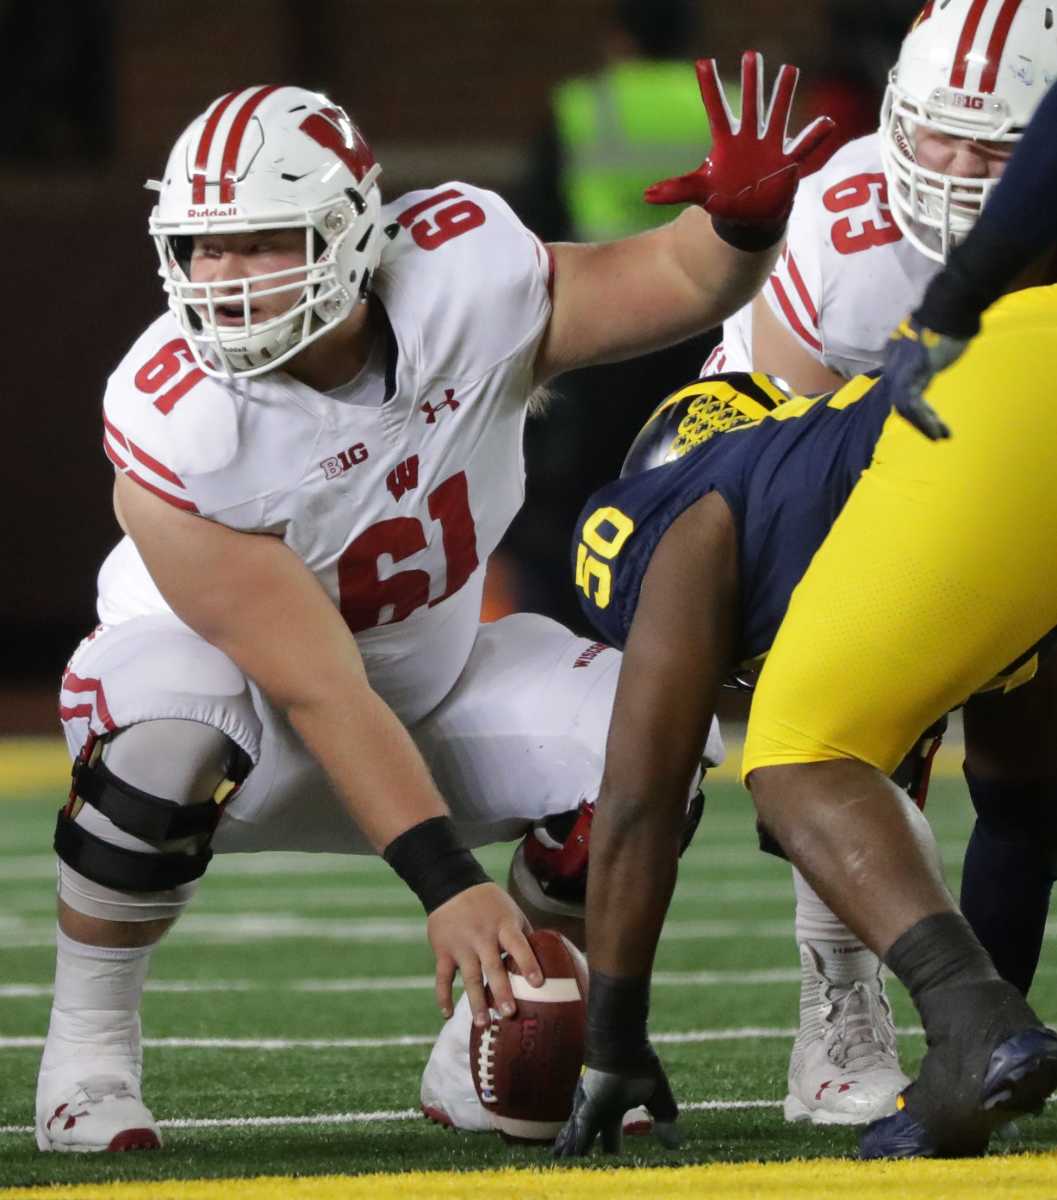 Wisconsin offensive lineman Tyler Biadasz (61) makes an adjustment at the line during the third quarter of their game Saturday, October 13, 2018 at Michigan Stadium in Ann Arbor, Mich. In 2020, Wisconsin will have to replace Biadasz at center.